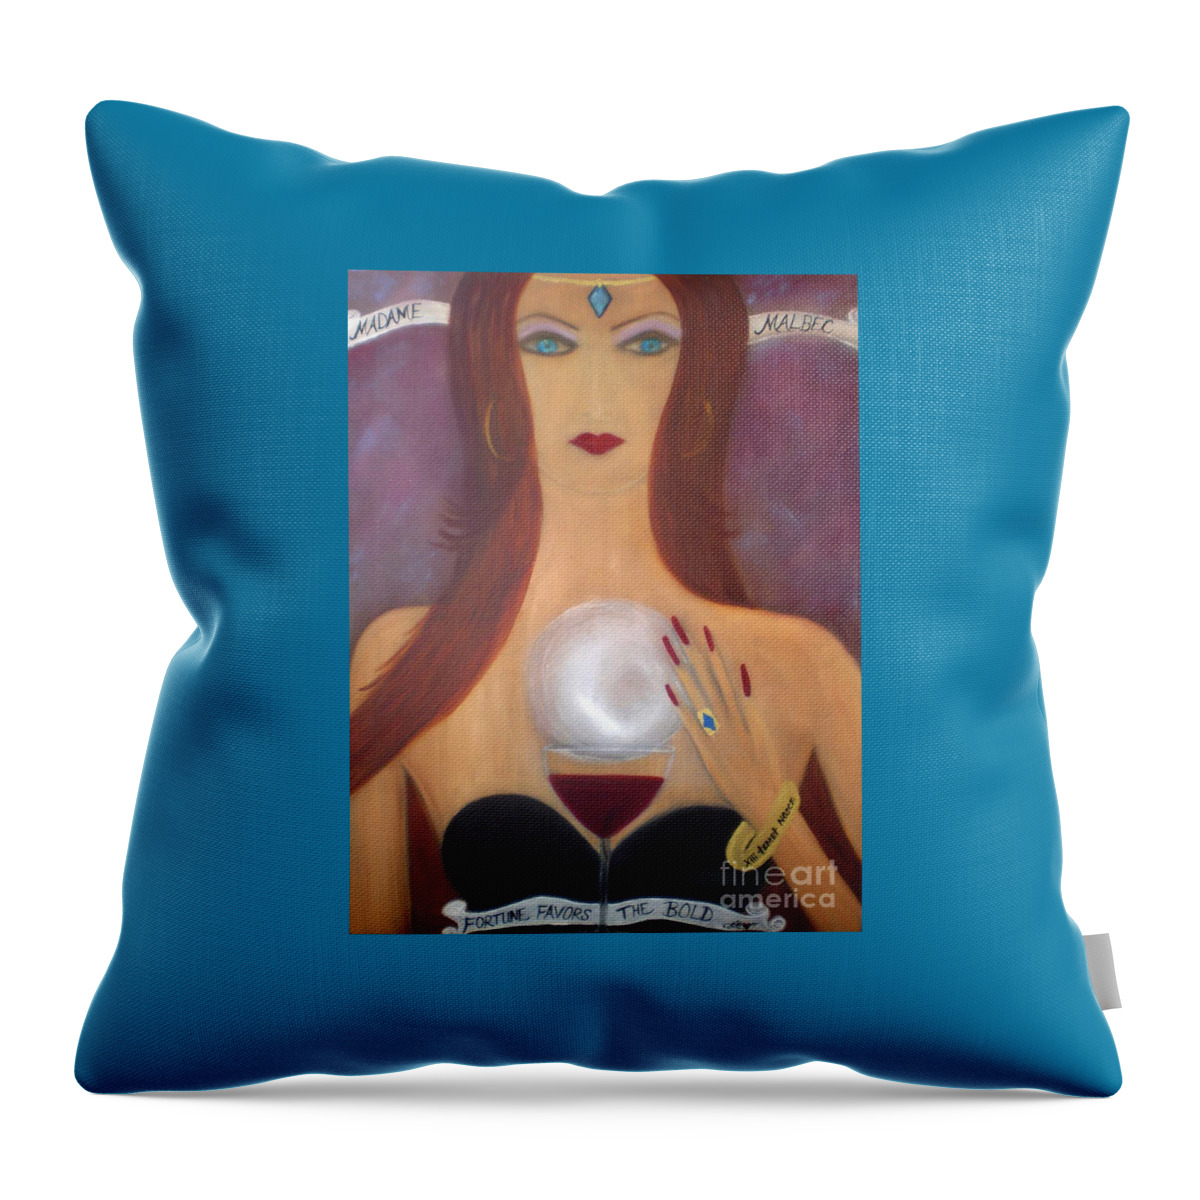 Malbec Throw Pillow featuring the painting Madame Malbec Fortune Favors the Bold by Artist Linda Marie